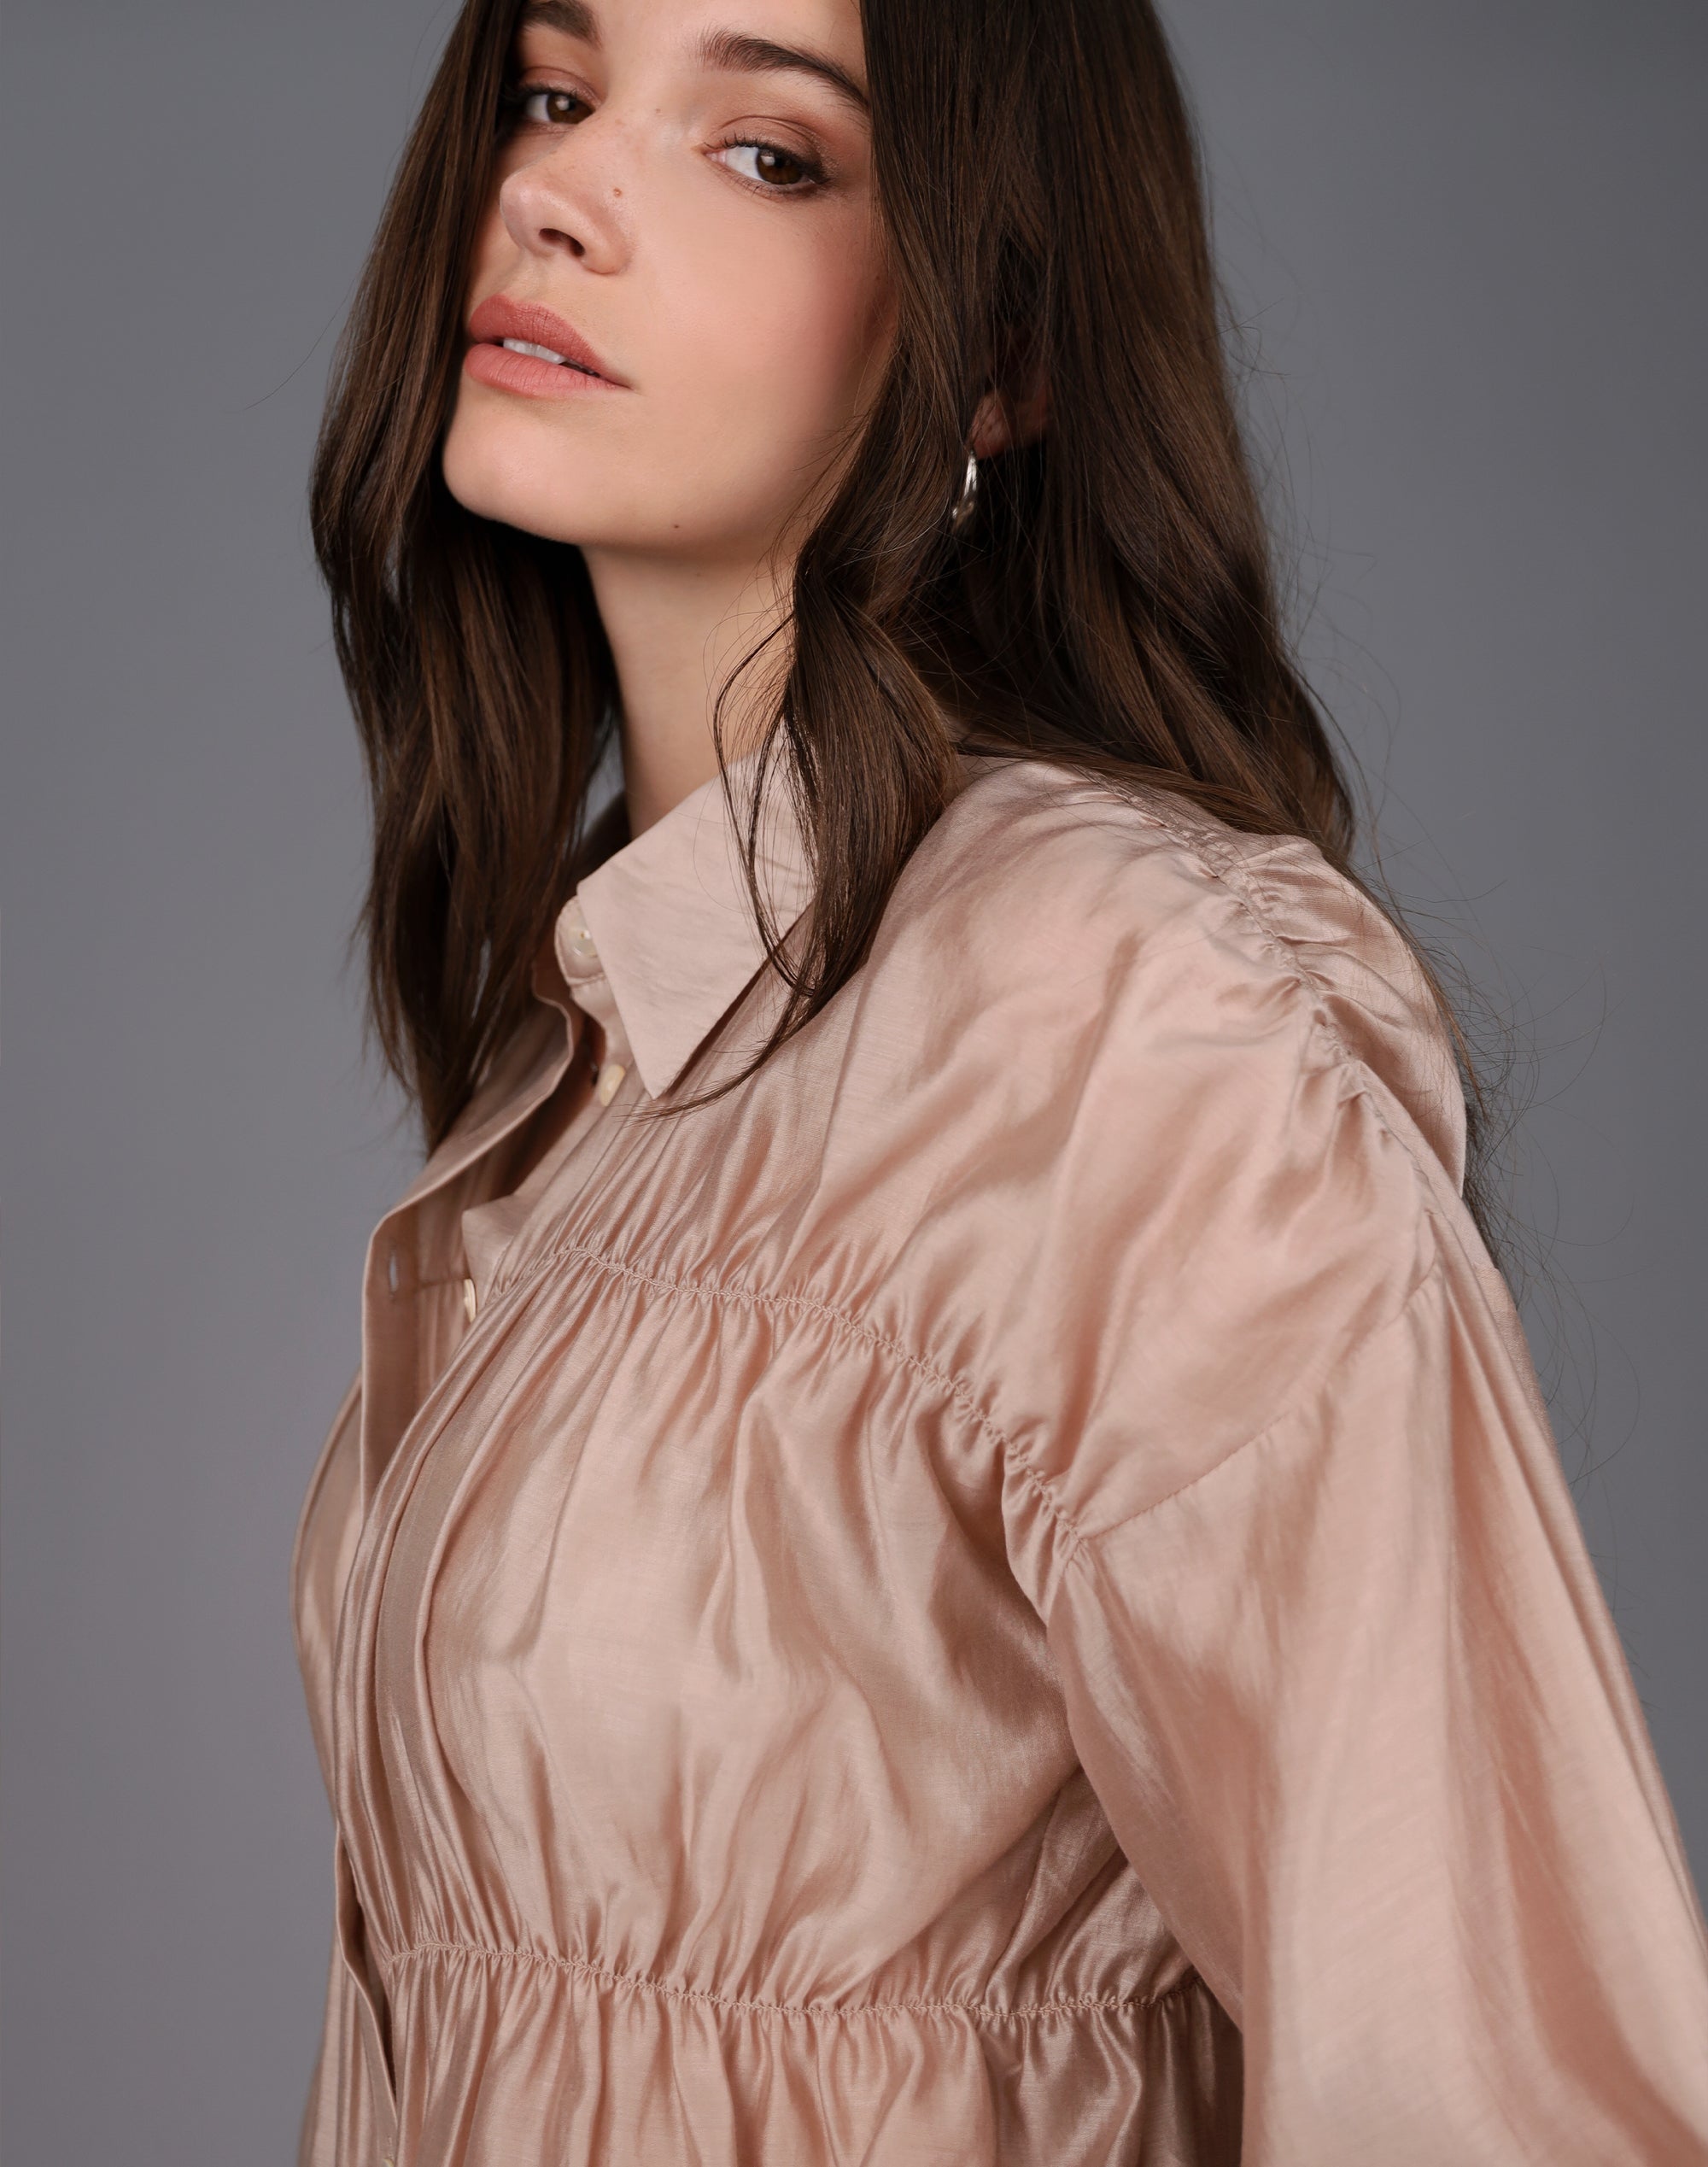 Ruched Body Shirt